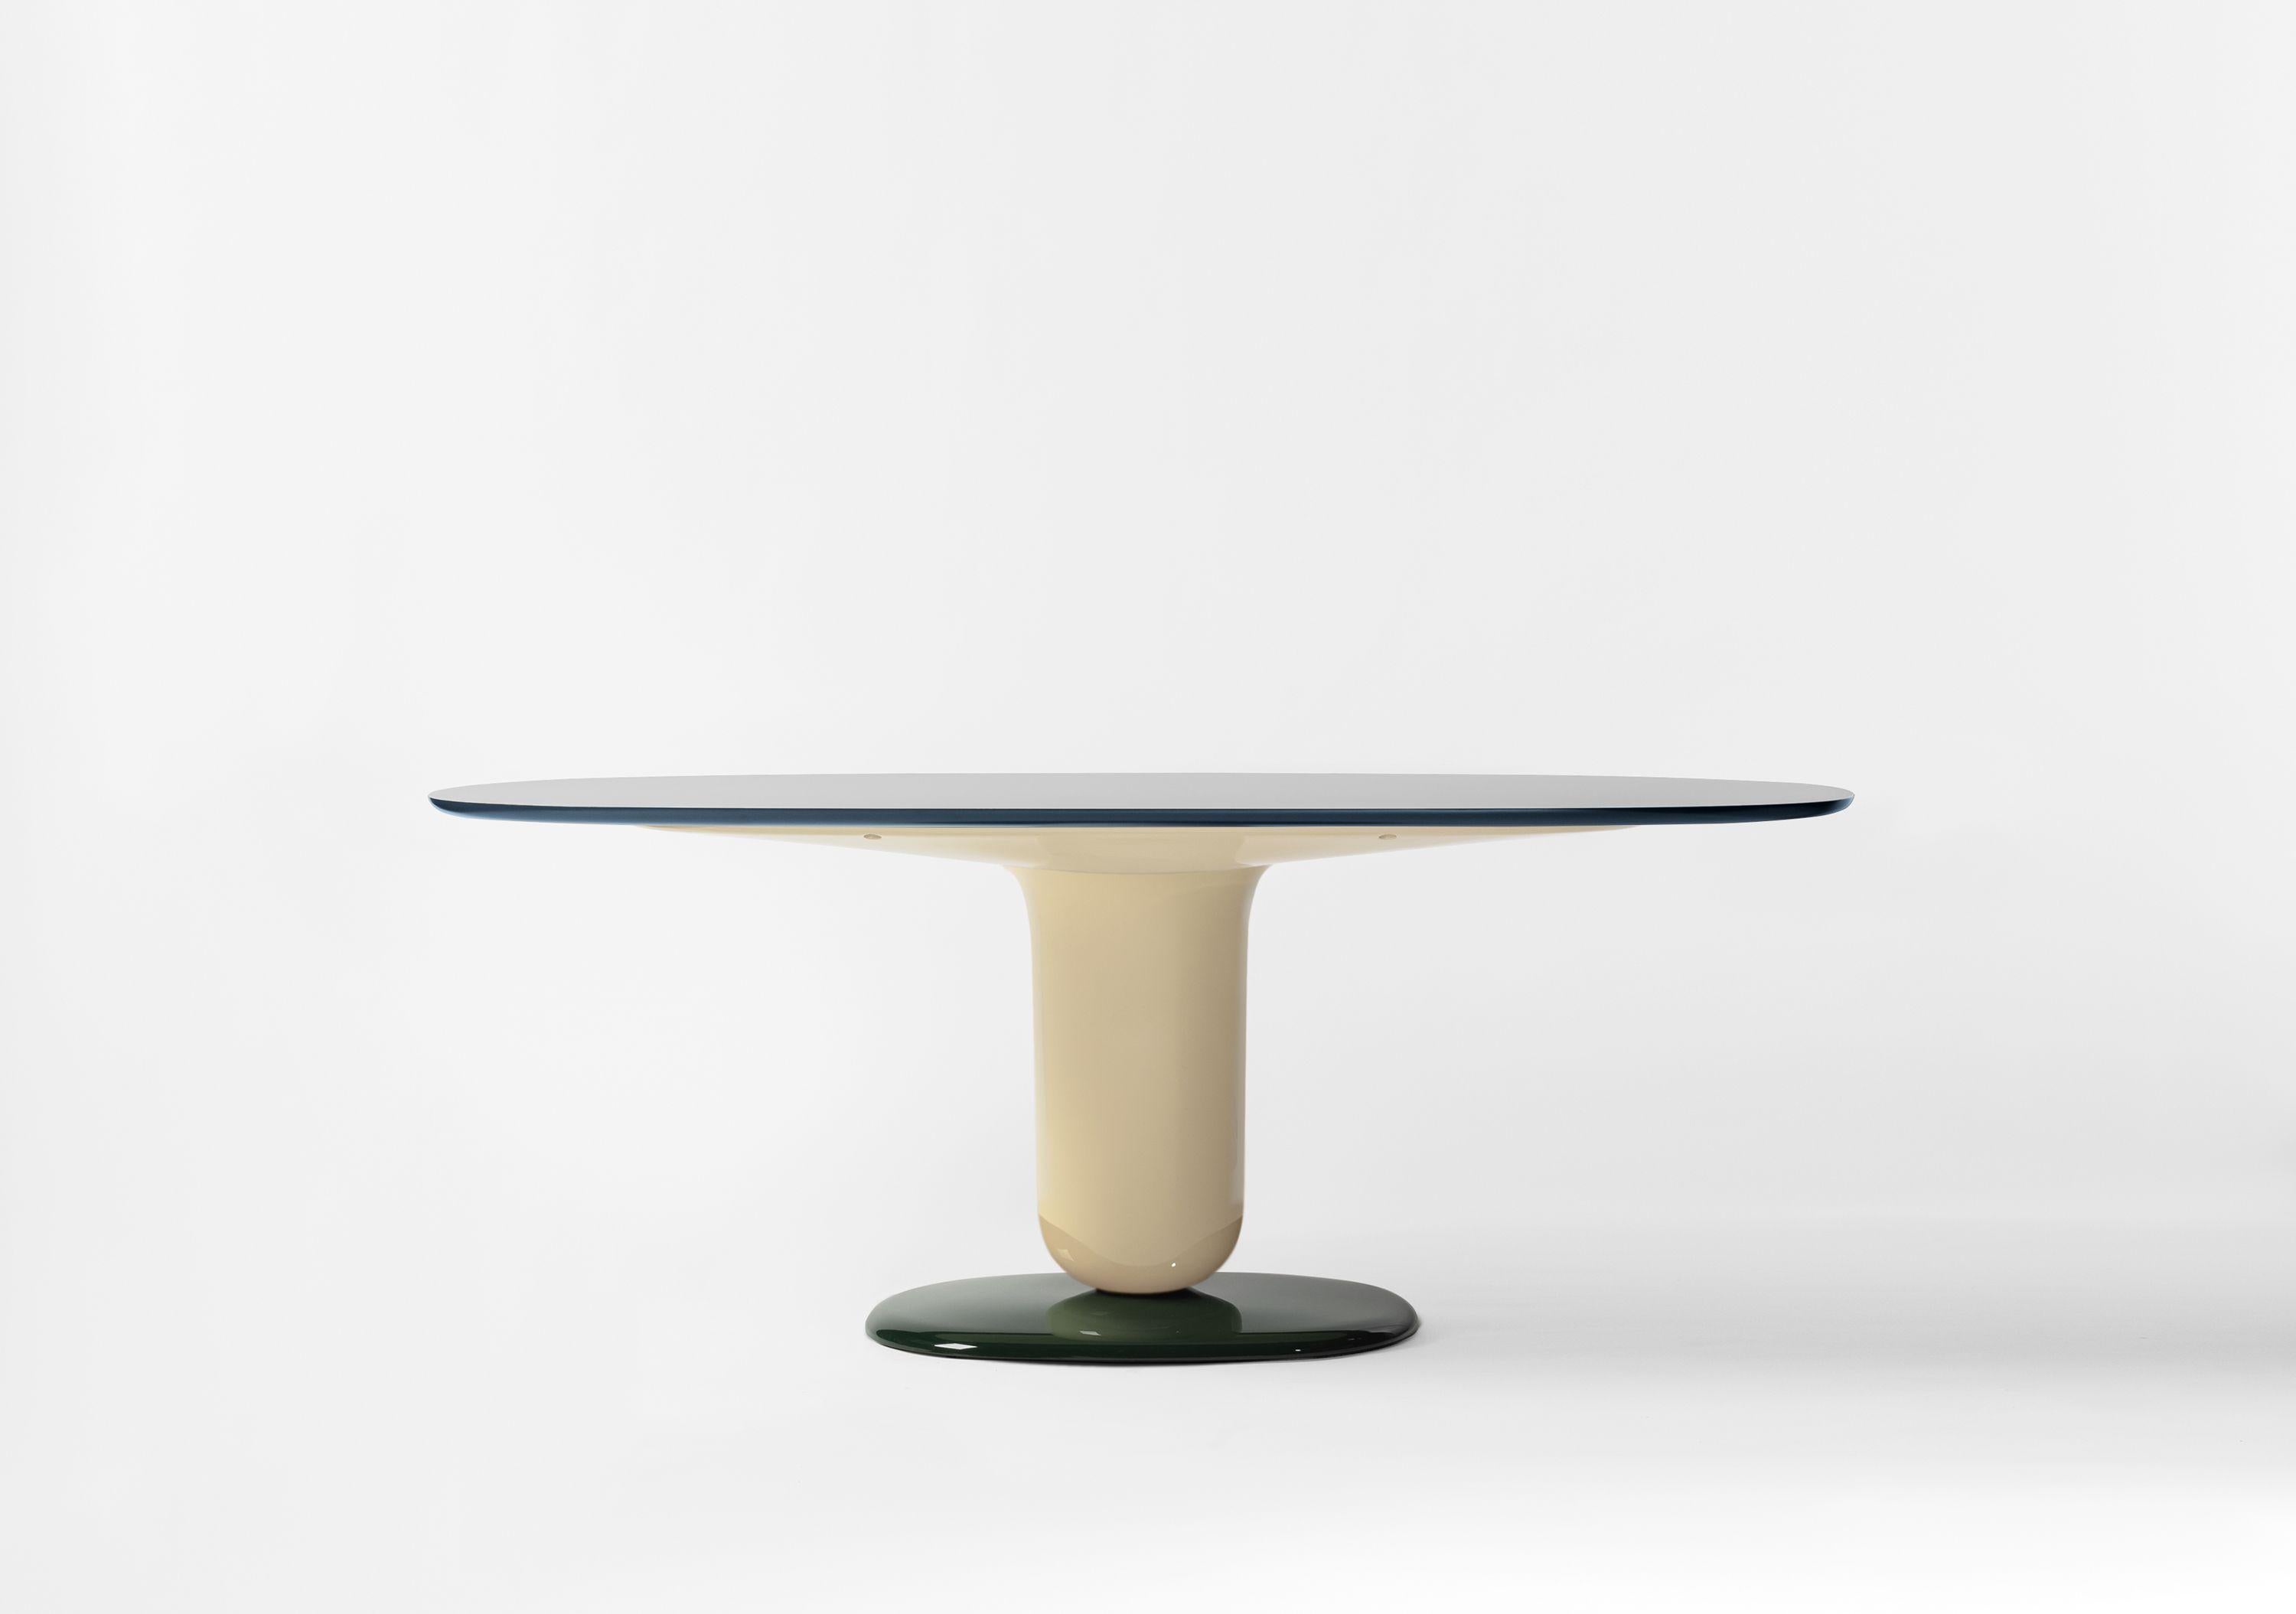 Multicolor Ivory 190 dining table.

Design in 2021 by Jaime Hayon added to the Explorer collection that started in 2019.
Manufactured by BD Barcelona.

As a continuation of the playful Explorer Table series and following its elegant beauty, we